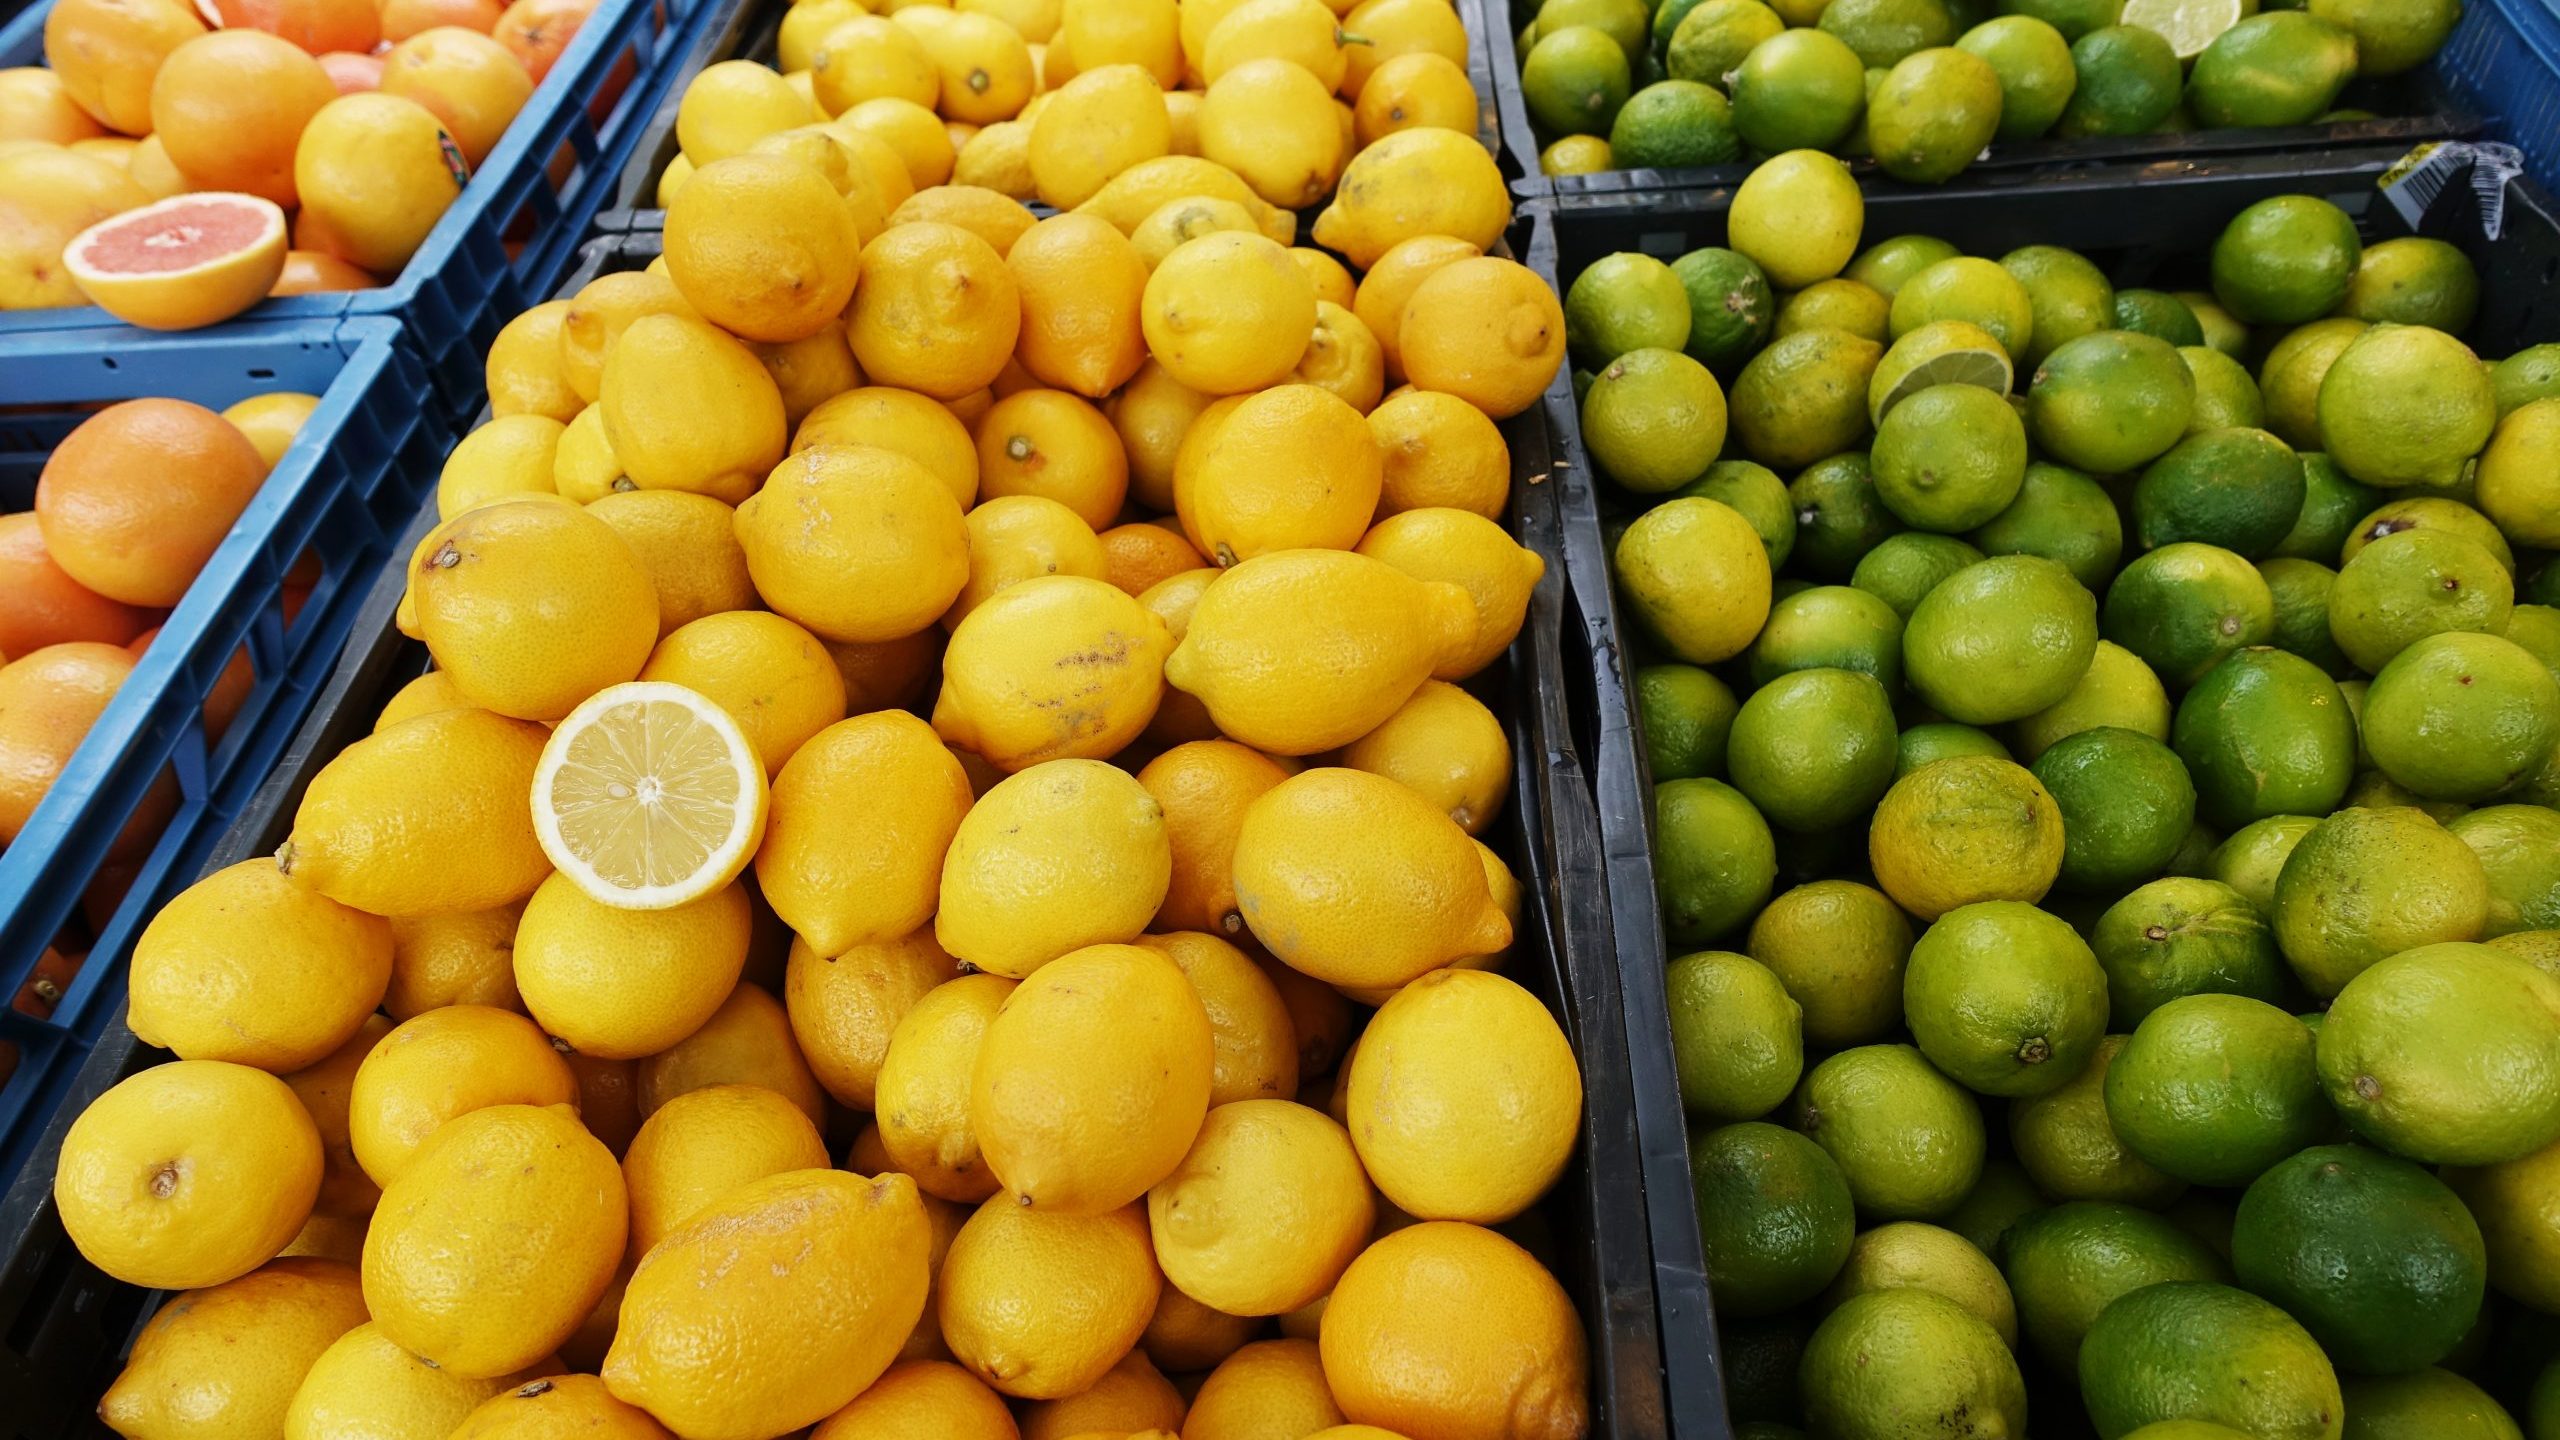 Fda Just Issued A Recall Of Potatoes Lemons Limes And Oranges